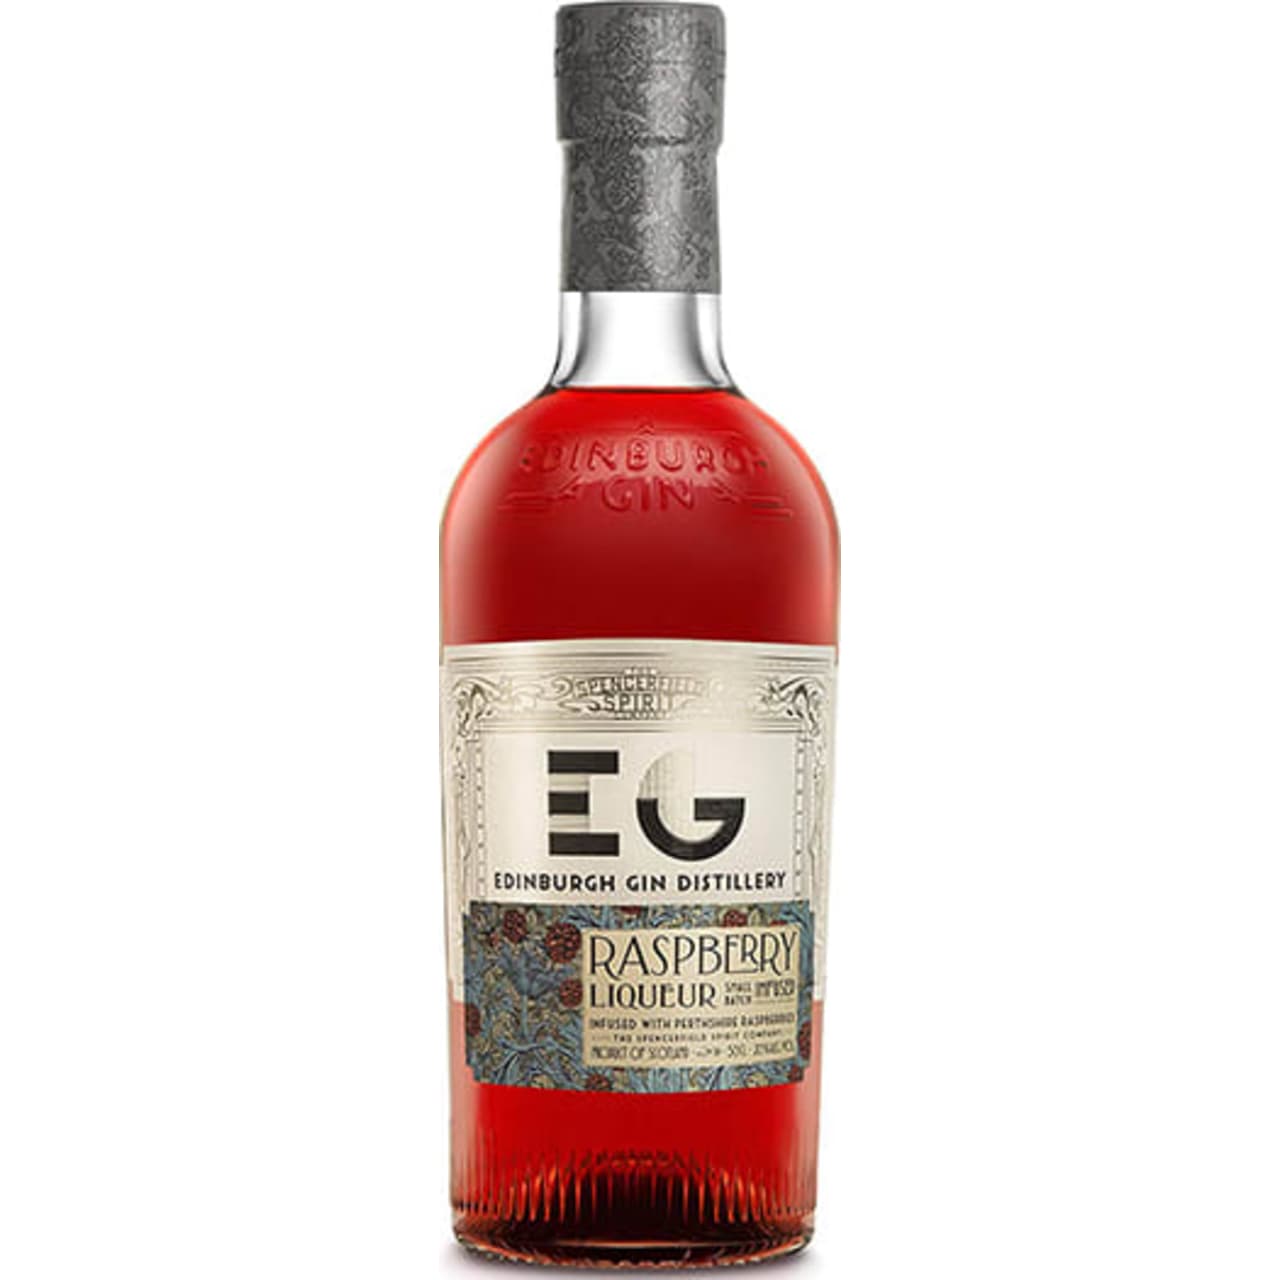 Crammed with natural soft fruits picked at peak ripeness from the best raspberry fields in Scotland and the world.